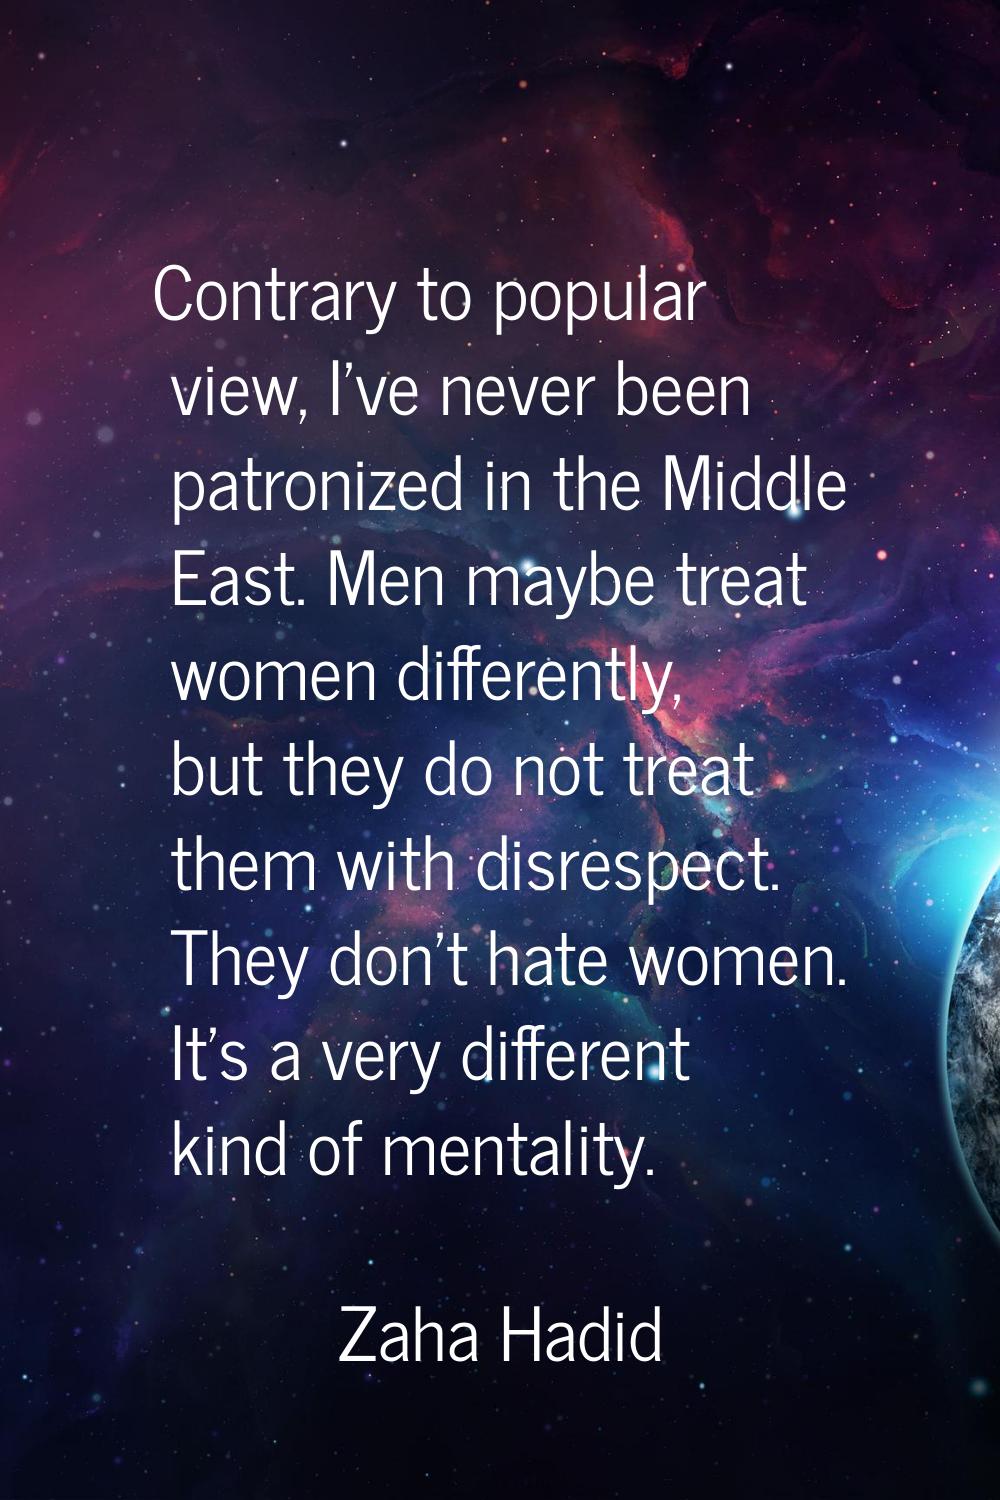 Contrary to popular view, I've never been patronized in the Middle East. Men maybe treat women diff